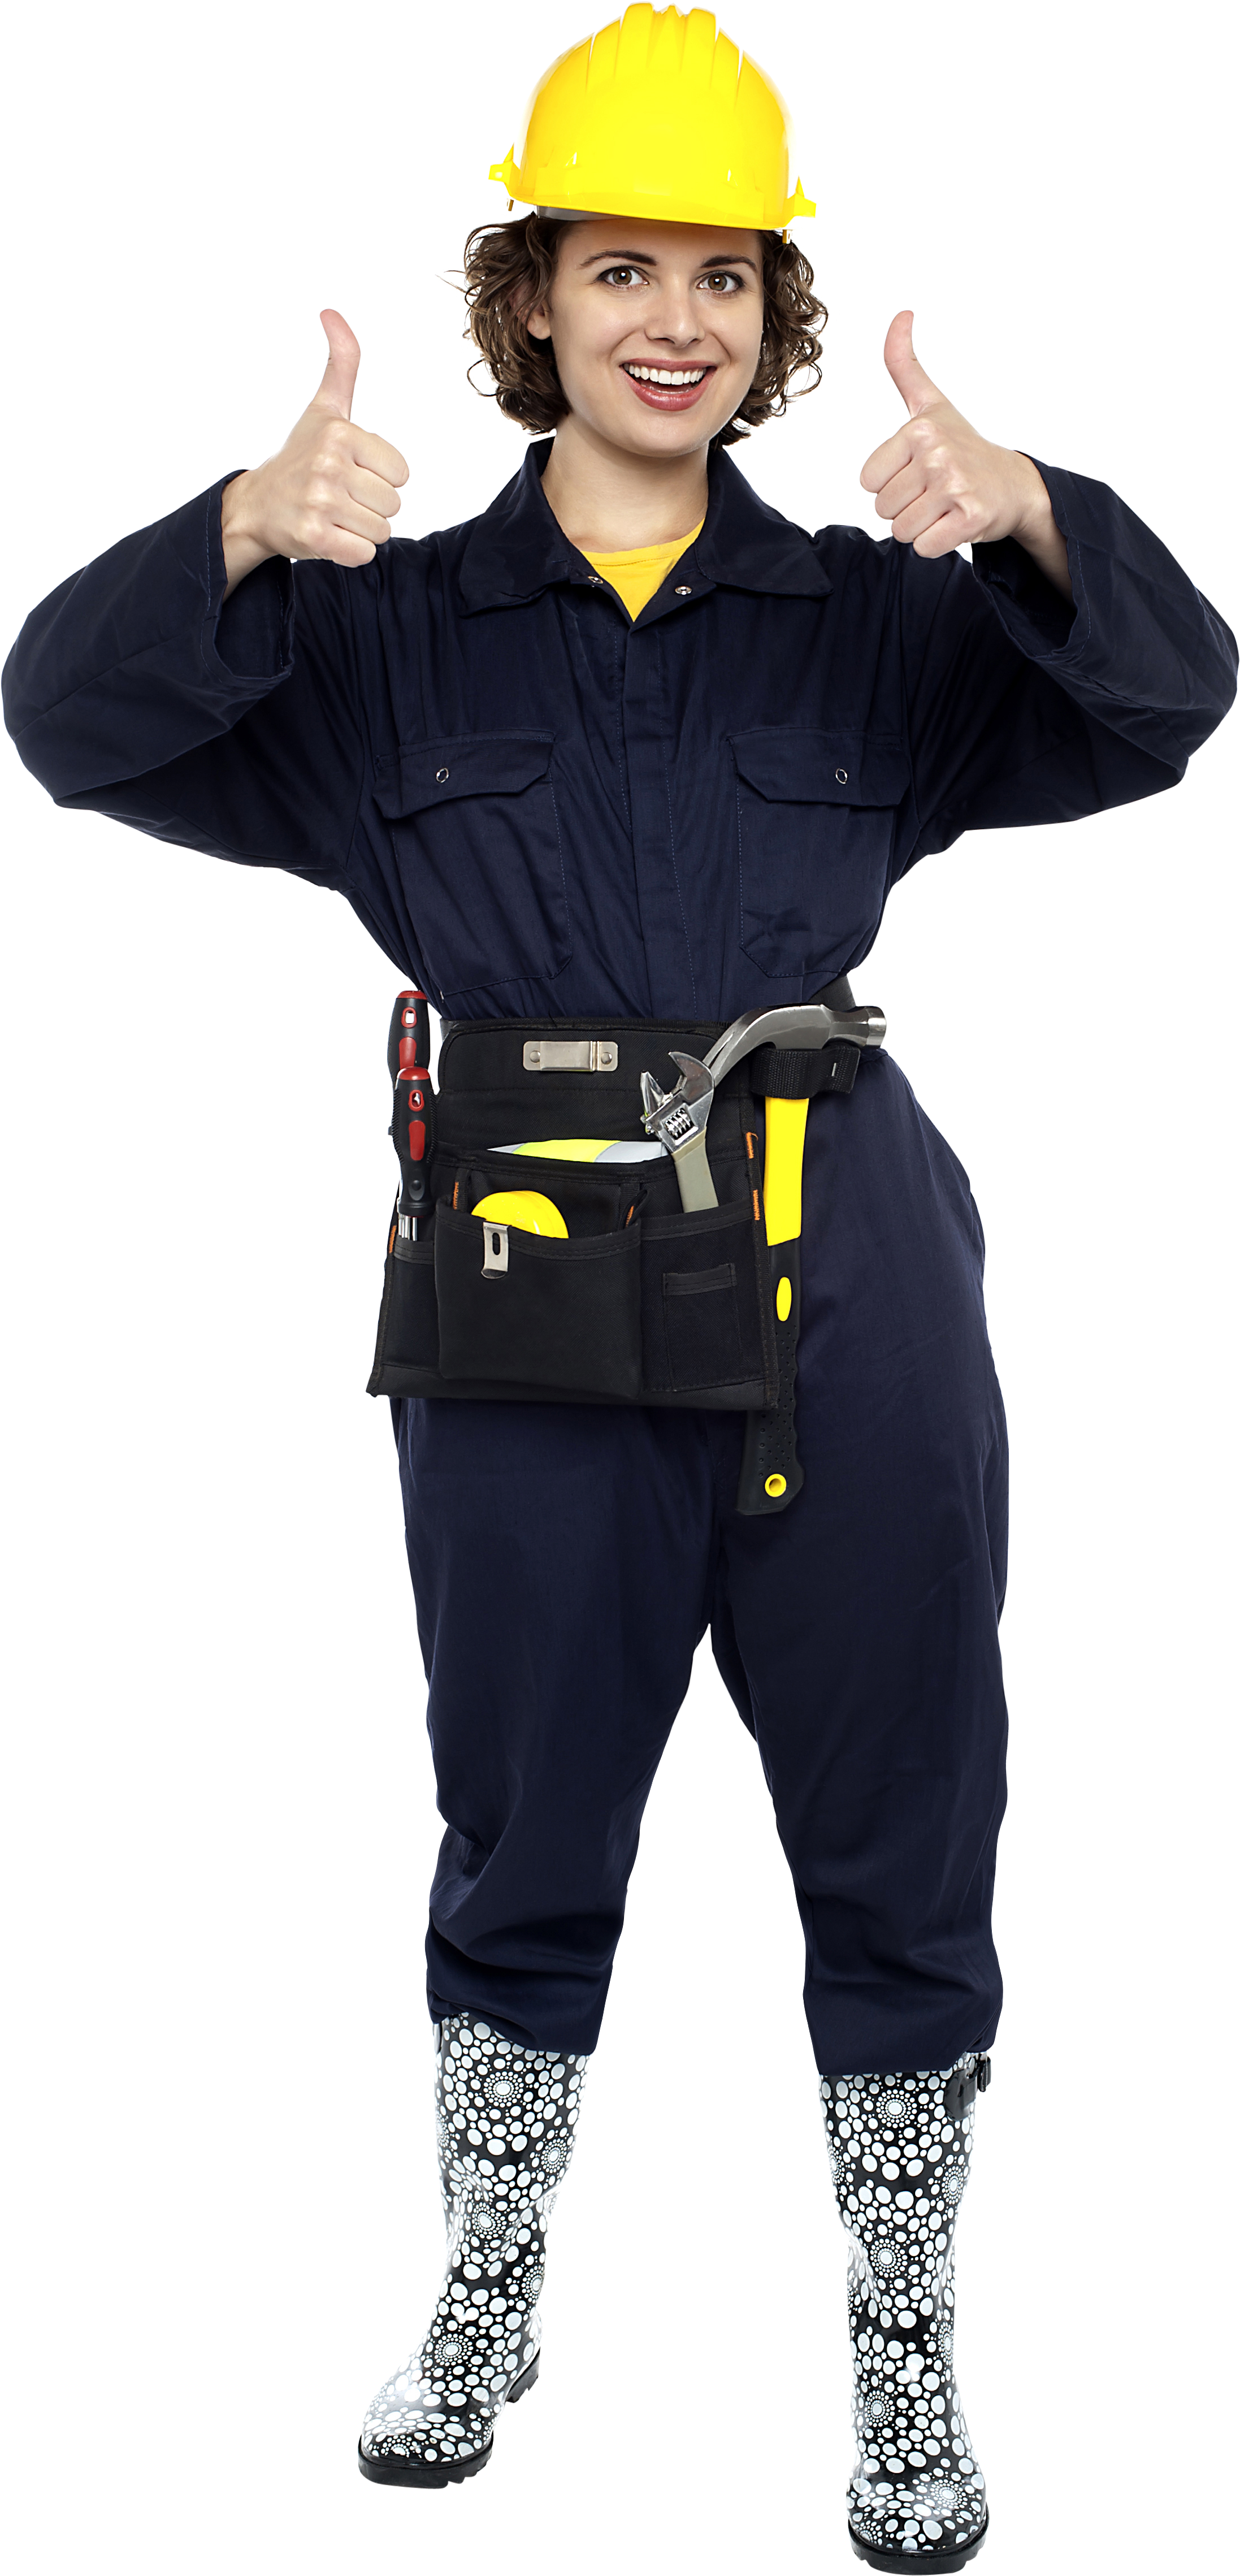 This High Quality Free Png Image Without Any Background - Construction Worker (3200x4809)